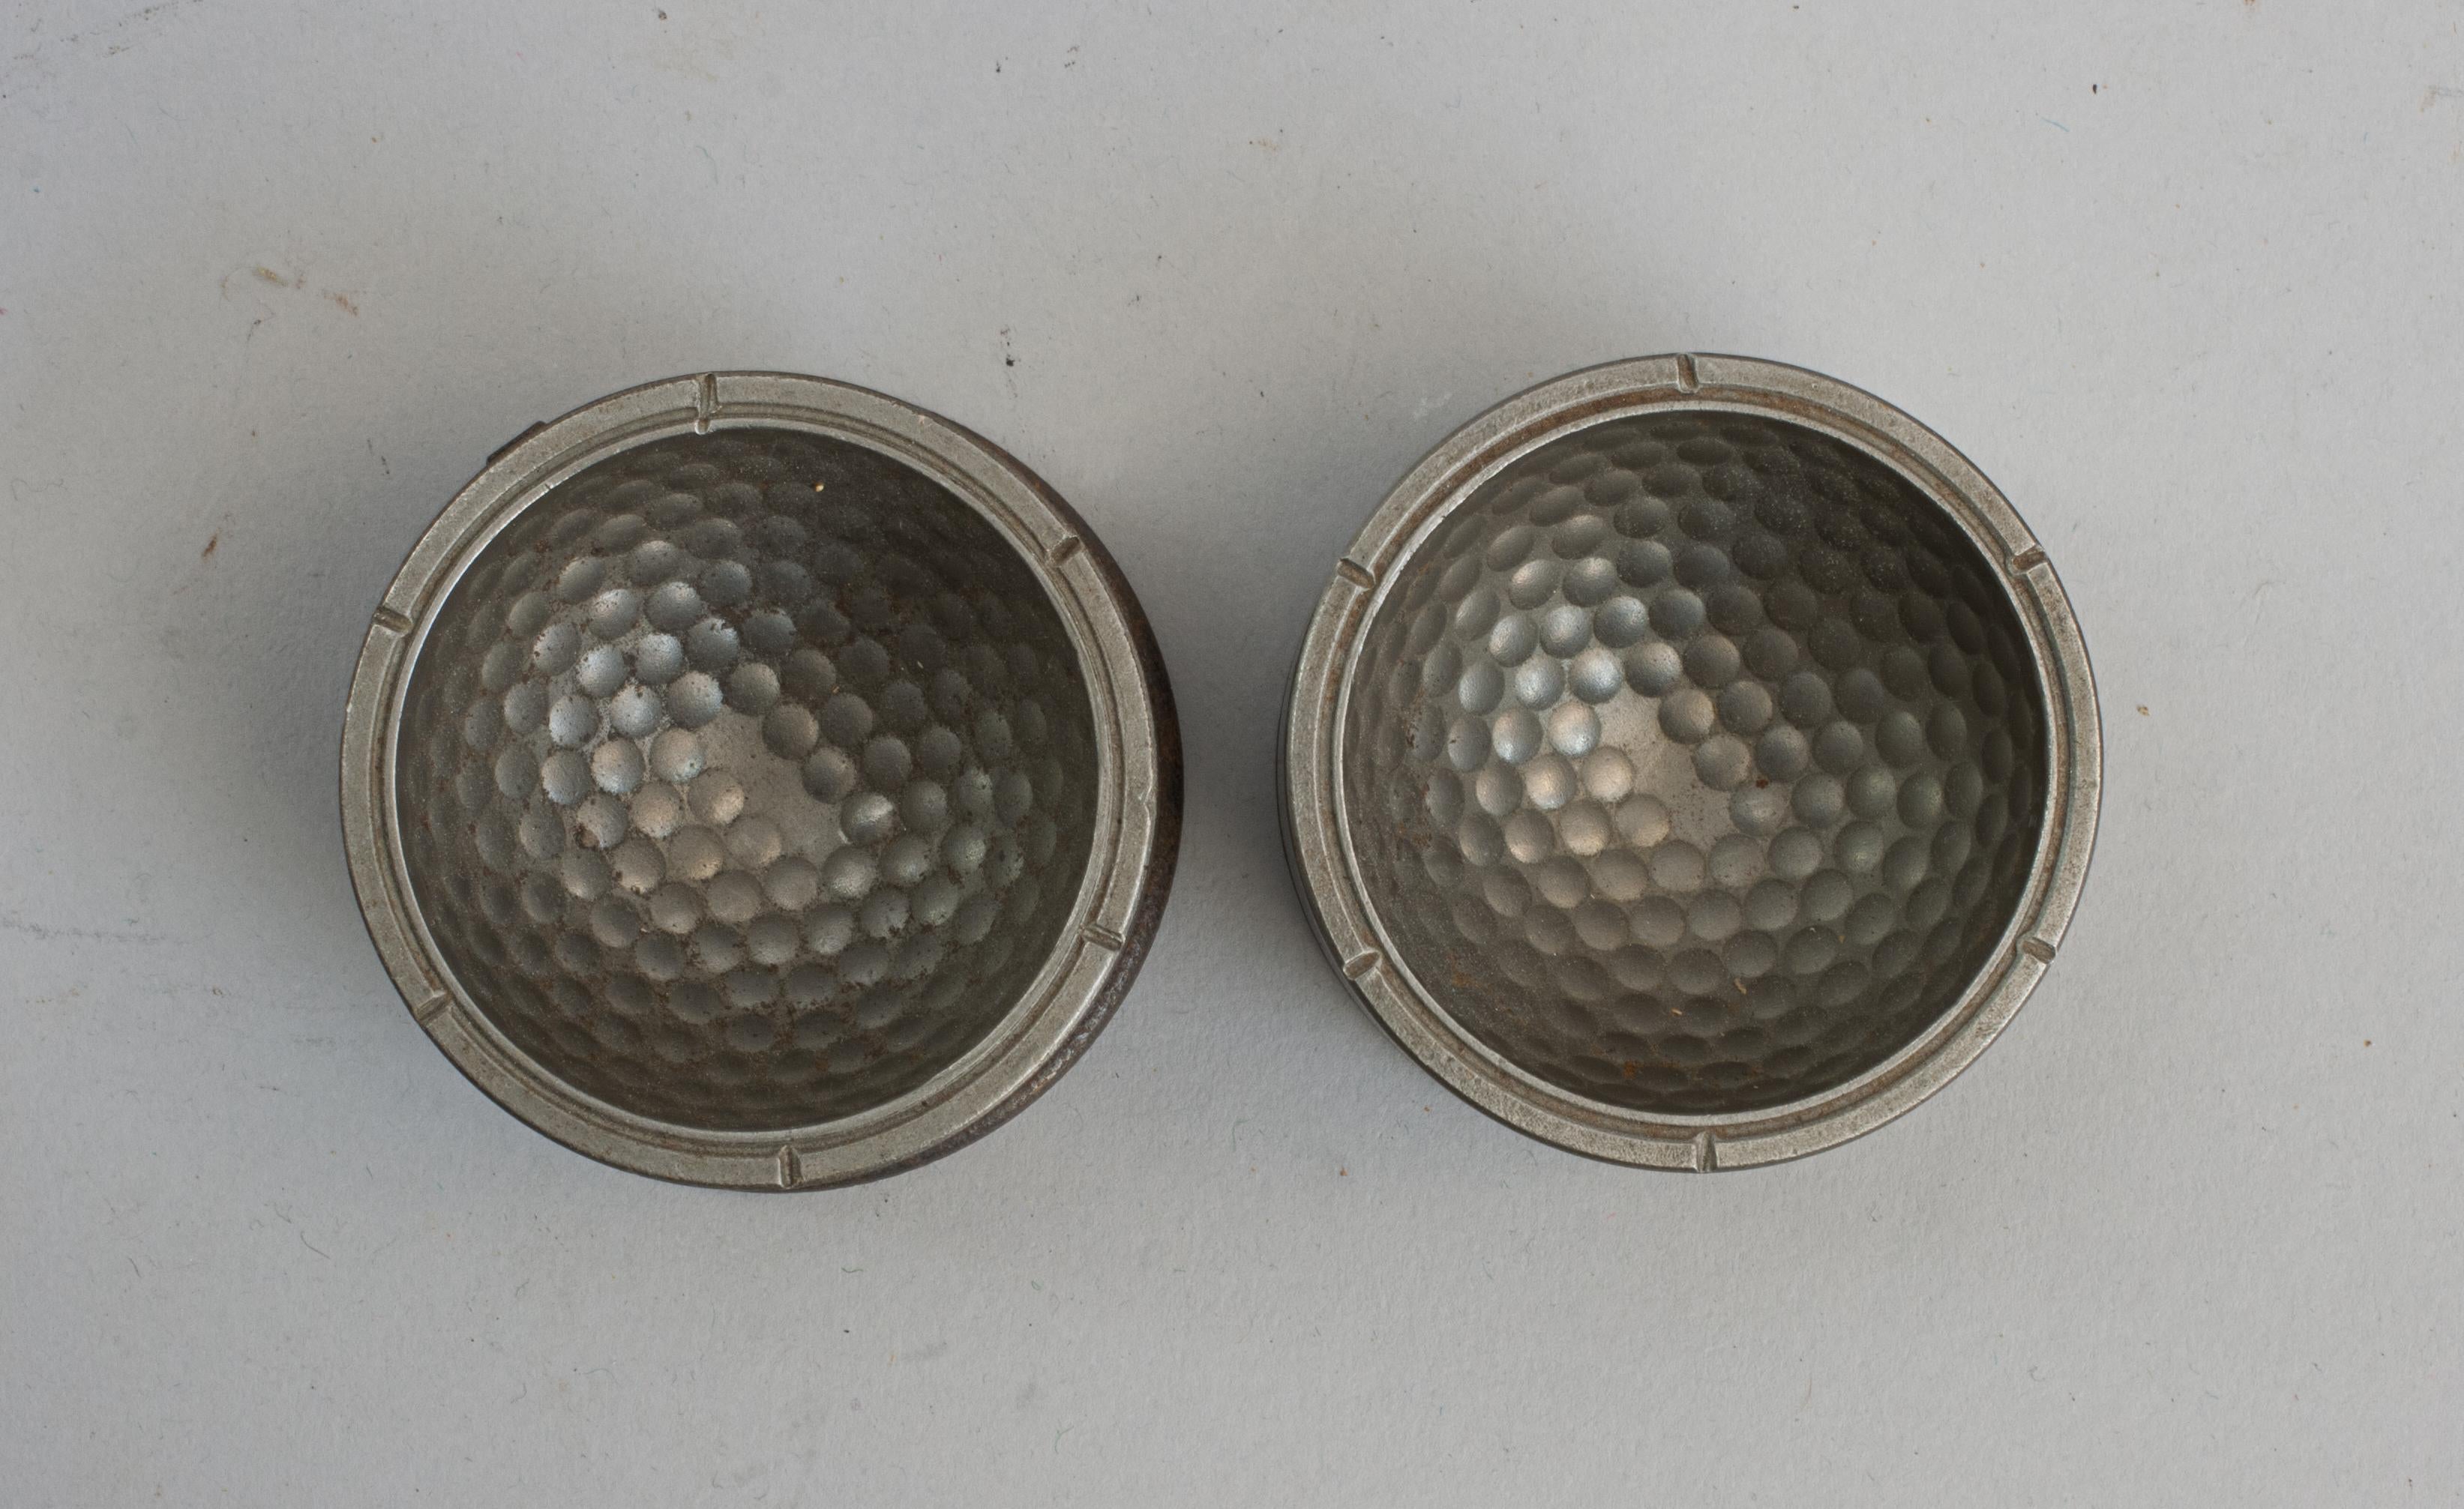 Vintage Two-Part Dimple Golf Ball Mould.
An interesting un-named dimple pattern golf ball mould. The steel moulds with locating slots to ensure the correct alignment of the pattern, both parts stamped with a 'B' to the base. Internally one part